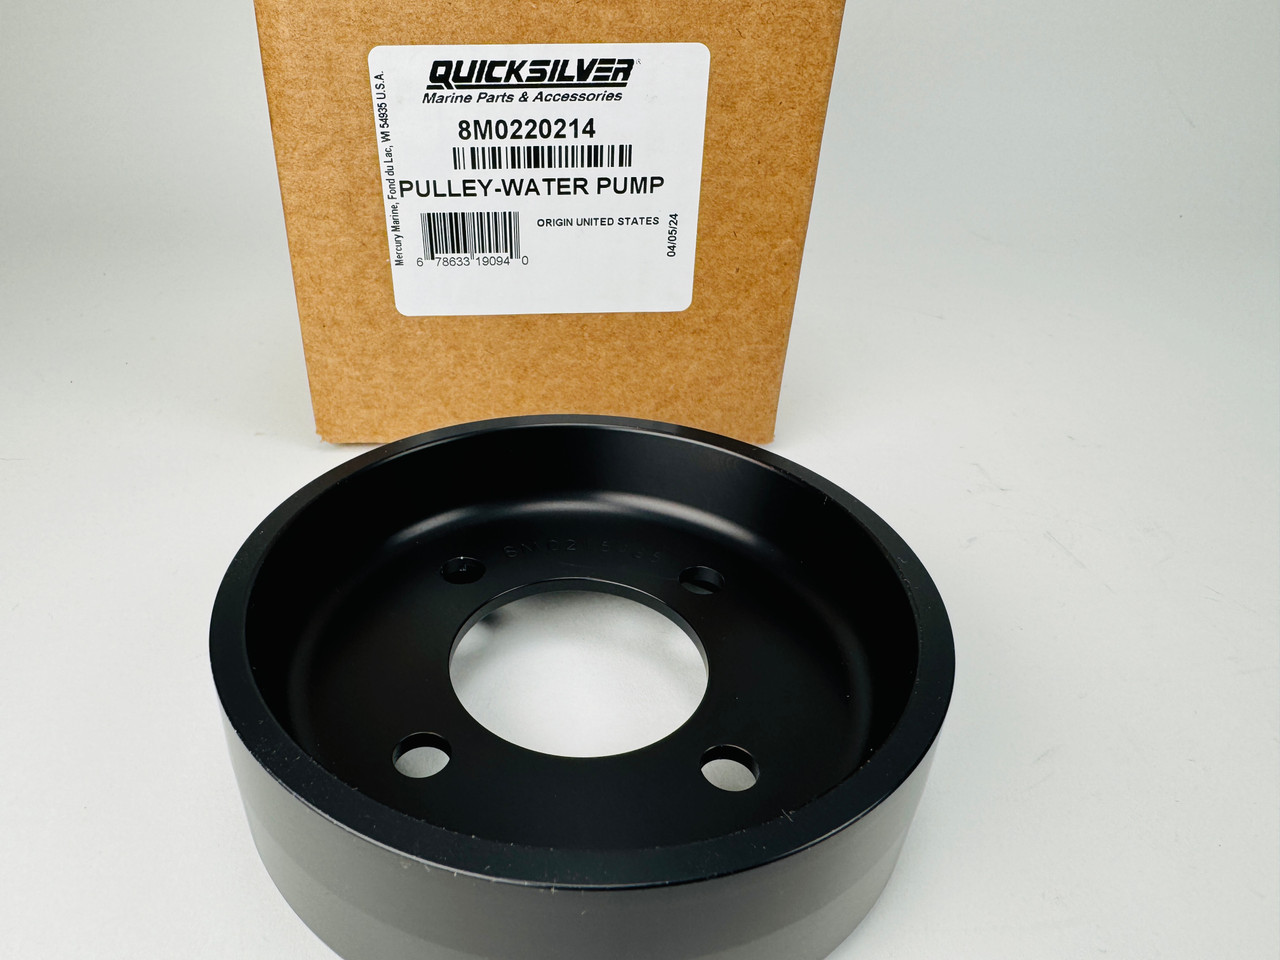 $229.99* GENUINE MERCRUISER PULLEY-WATER PUMP 8M0220214  *In Stock & Ready To Ship!